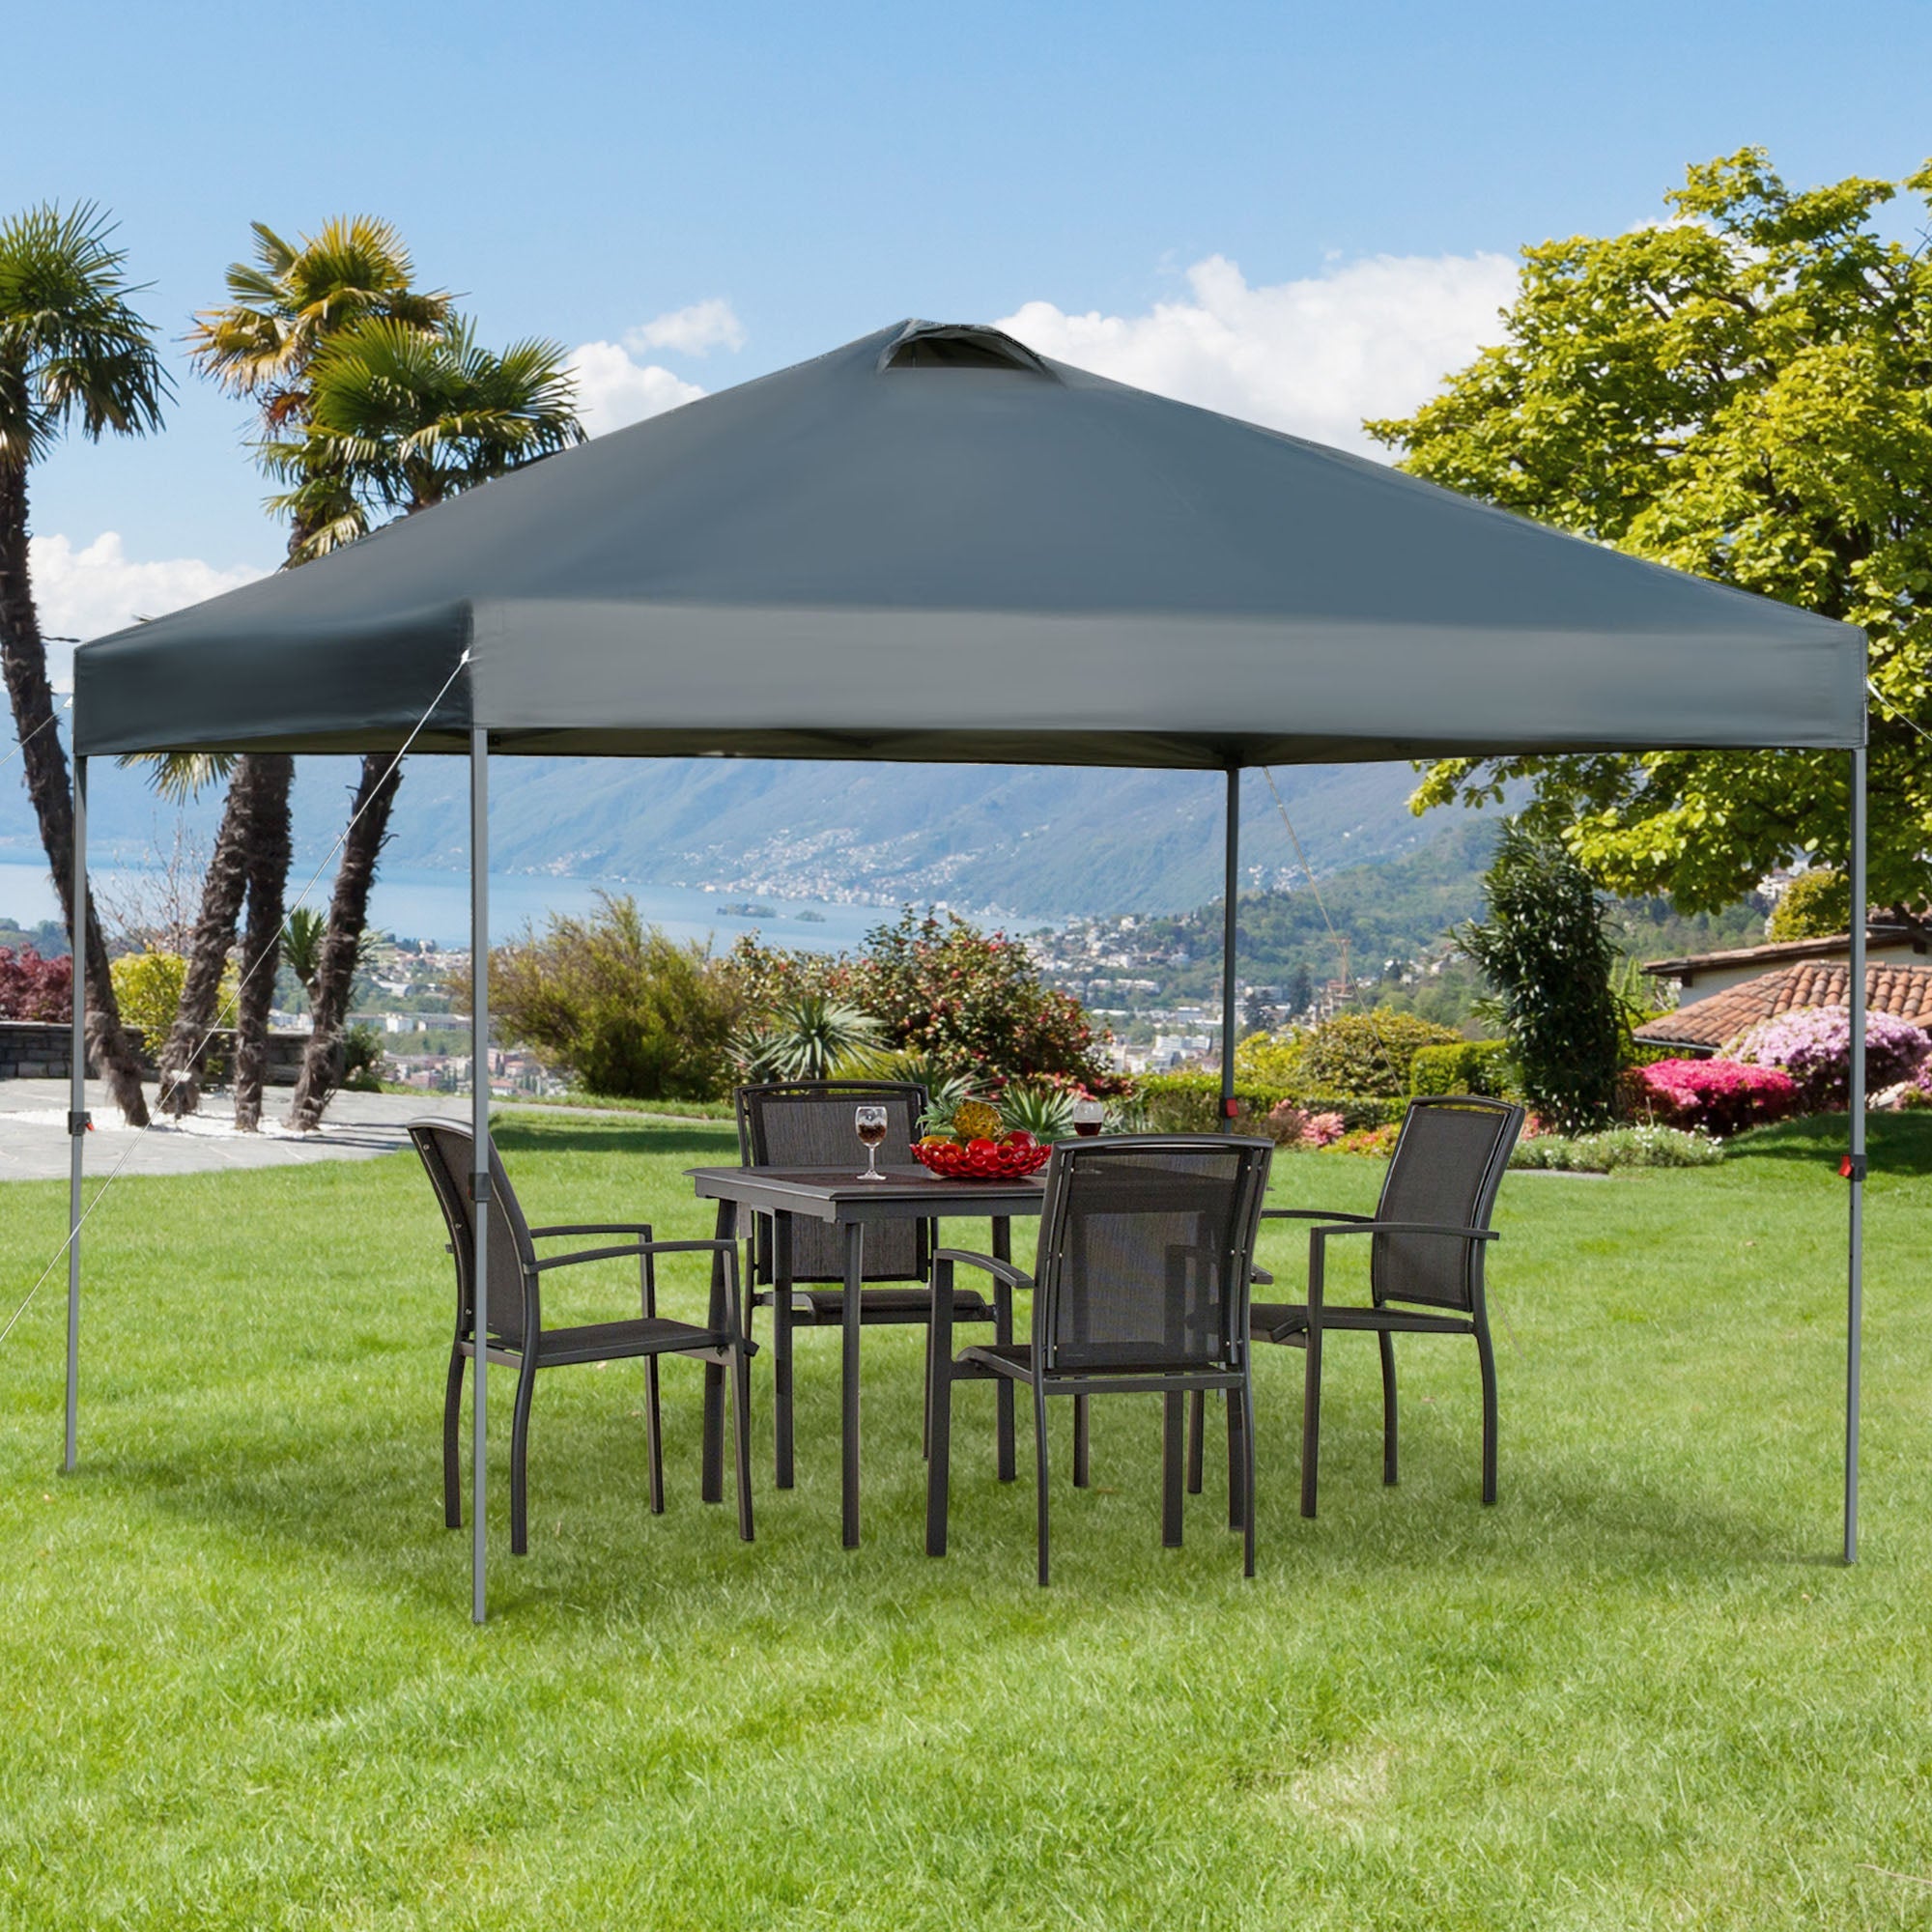 Outsunny 10' x 10' Outdoor Pop up Party Tent Canopy, Gray, Pop up Tent